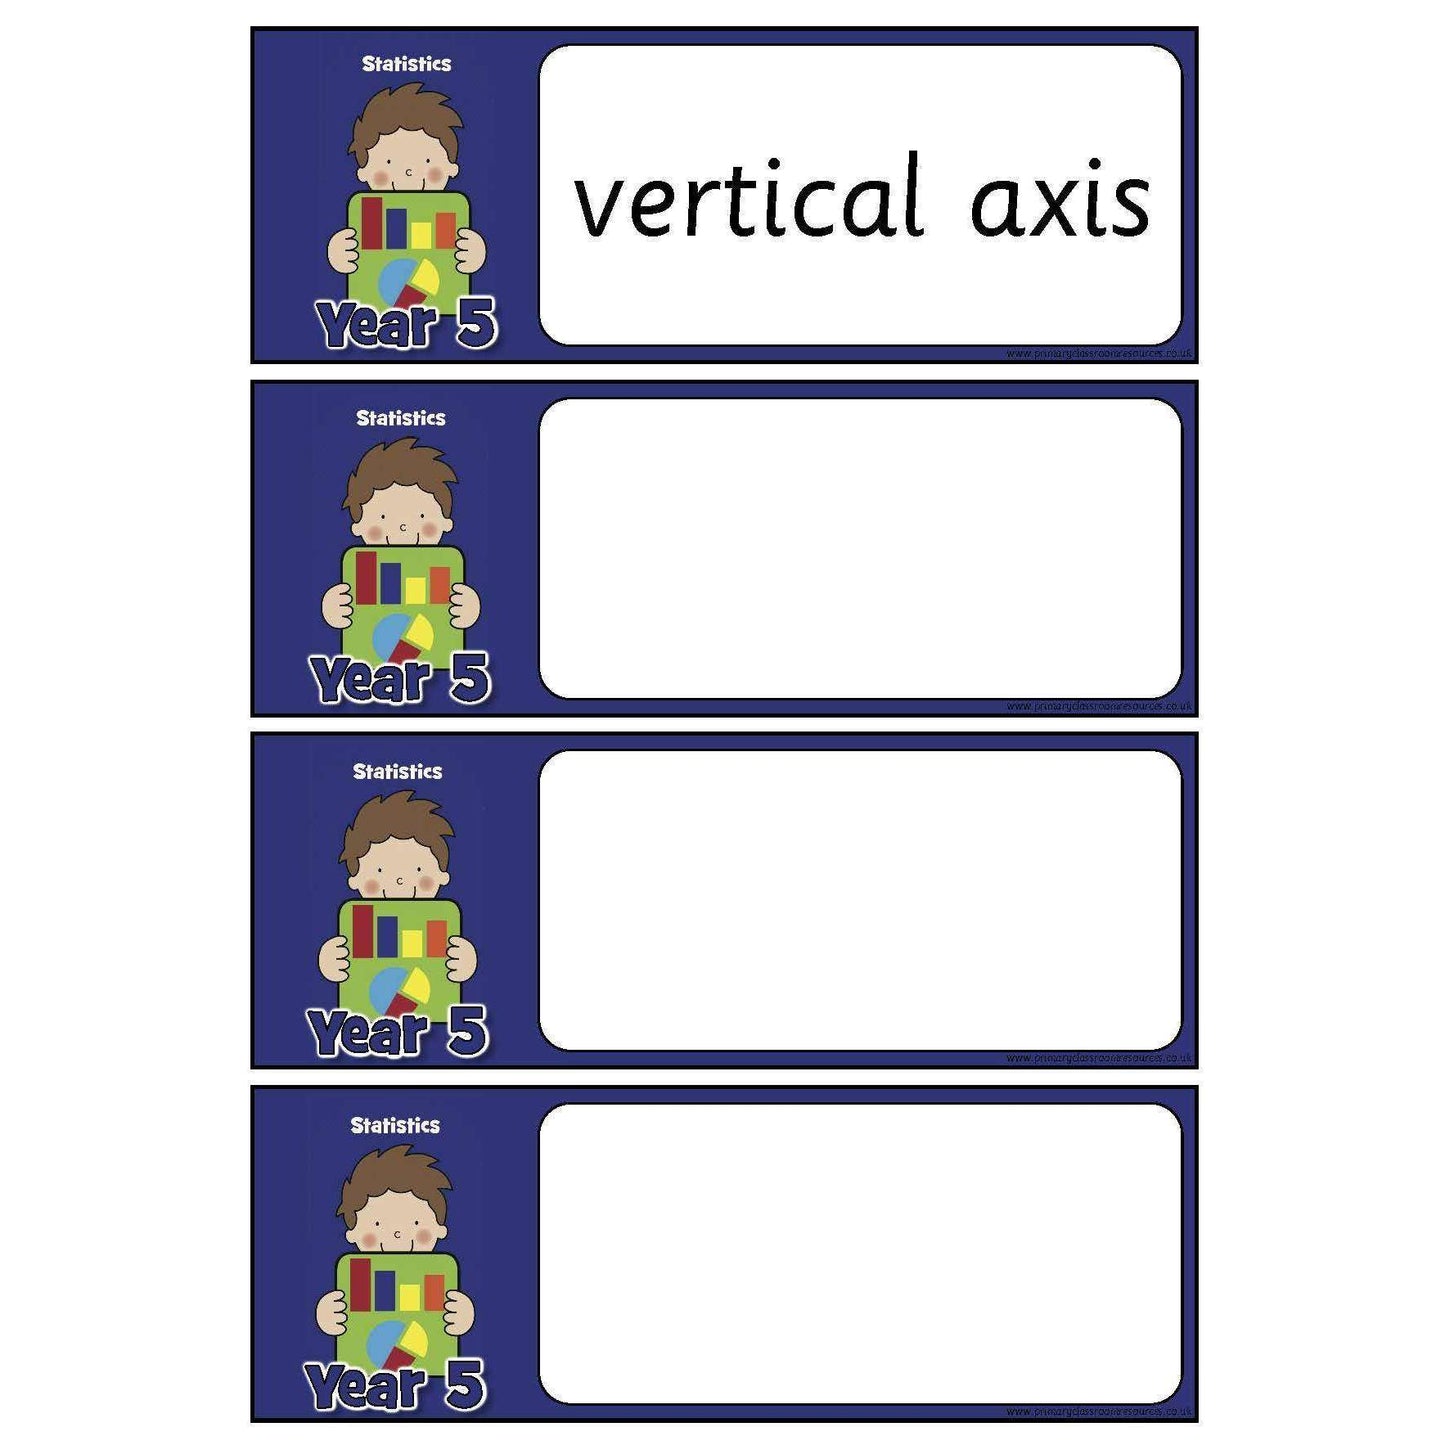 Year 5 Maths Vocabulary - Statistics:Primary Classroom Resources